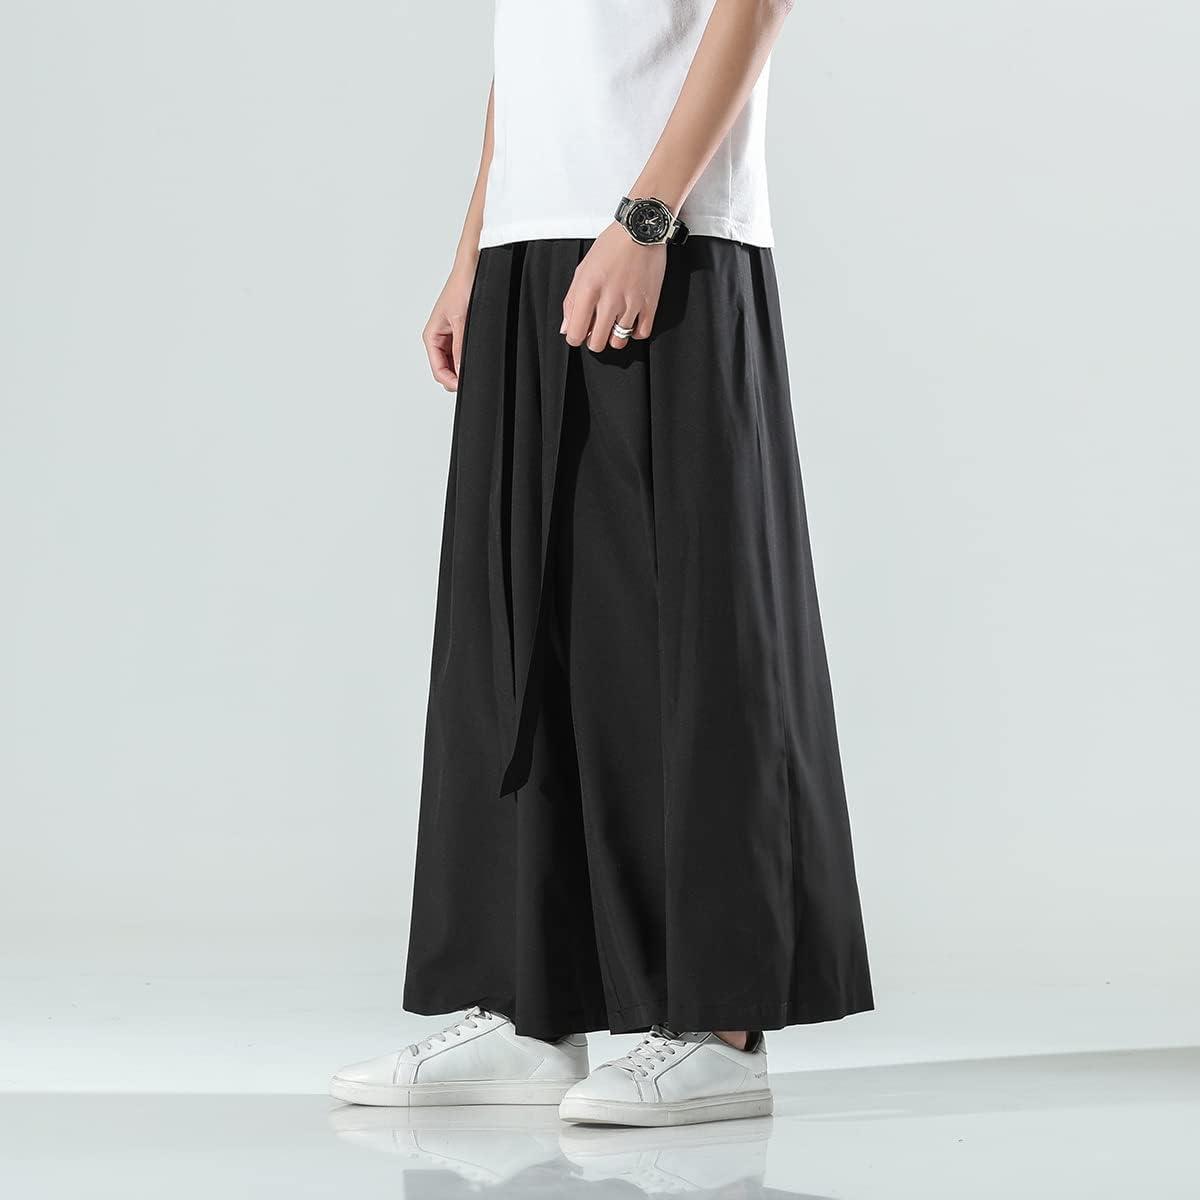 Men's Japanese Casual Loose Harem Trousers Baggy Hippy Pants Streets | eBay